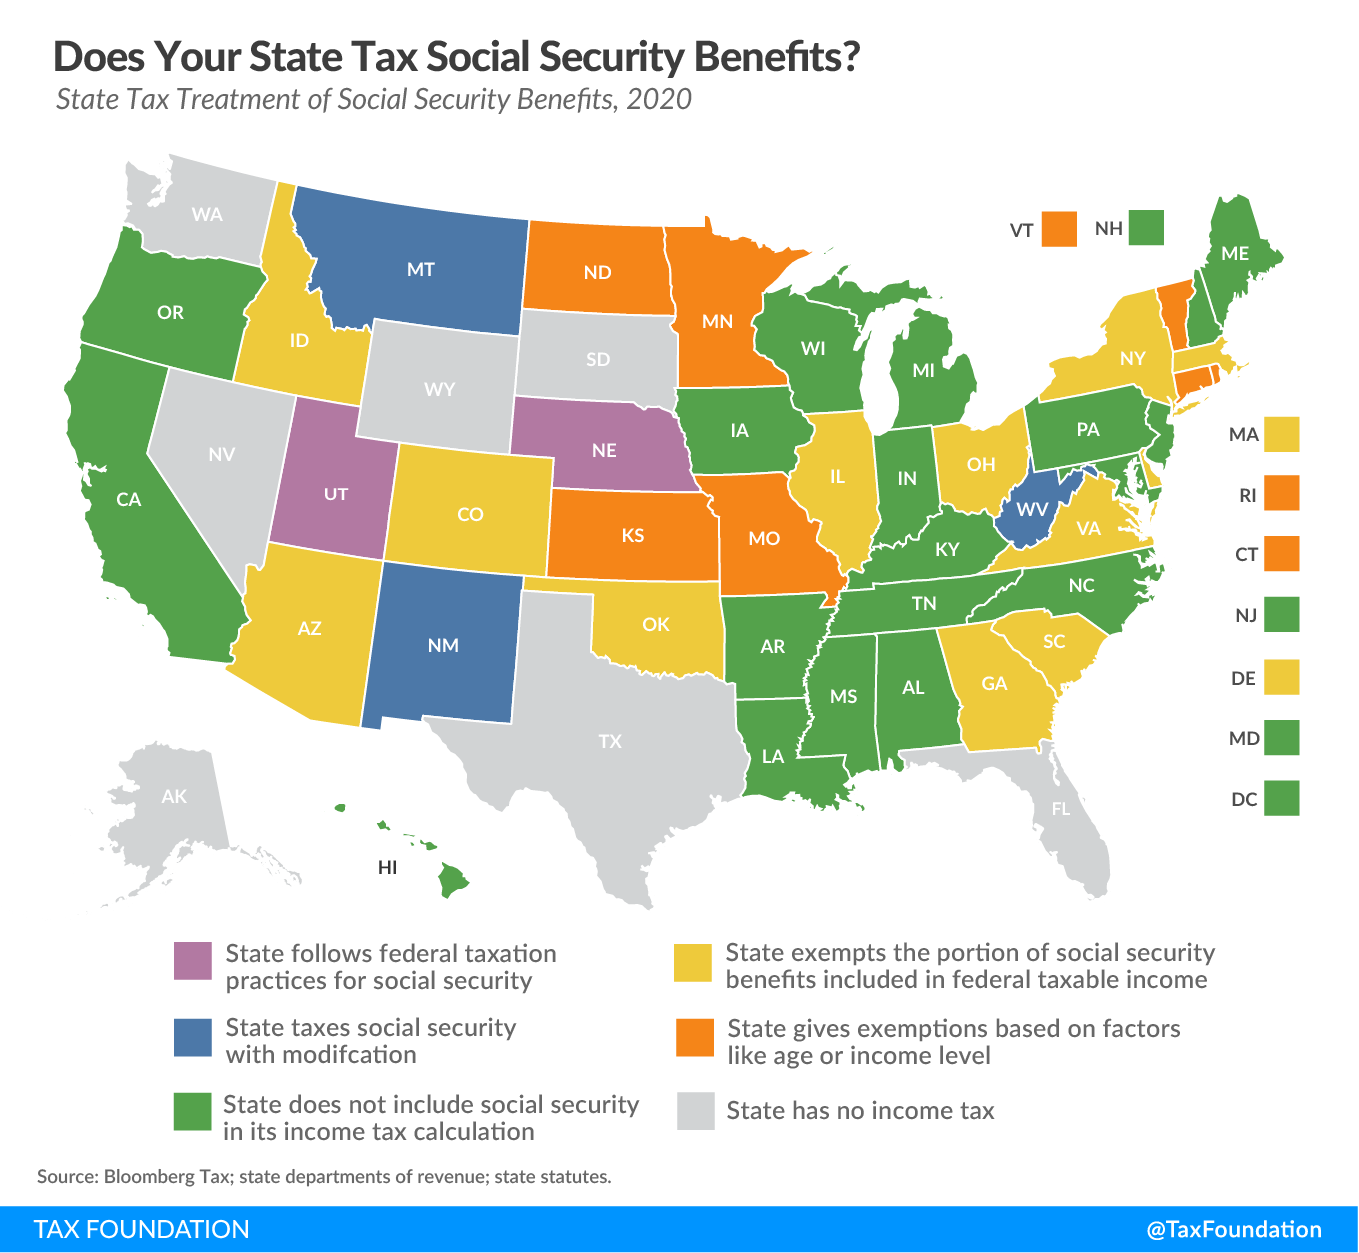 Does Your State Tax Social Security Benefits?